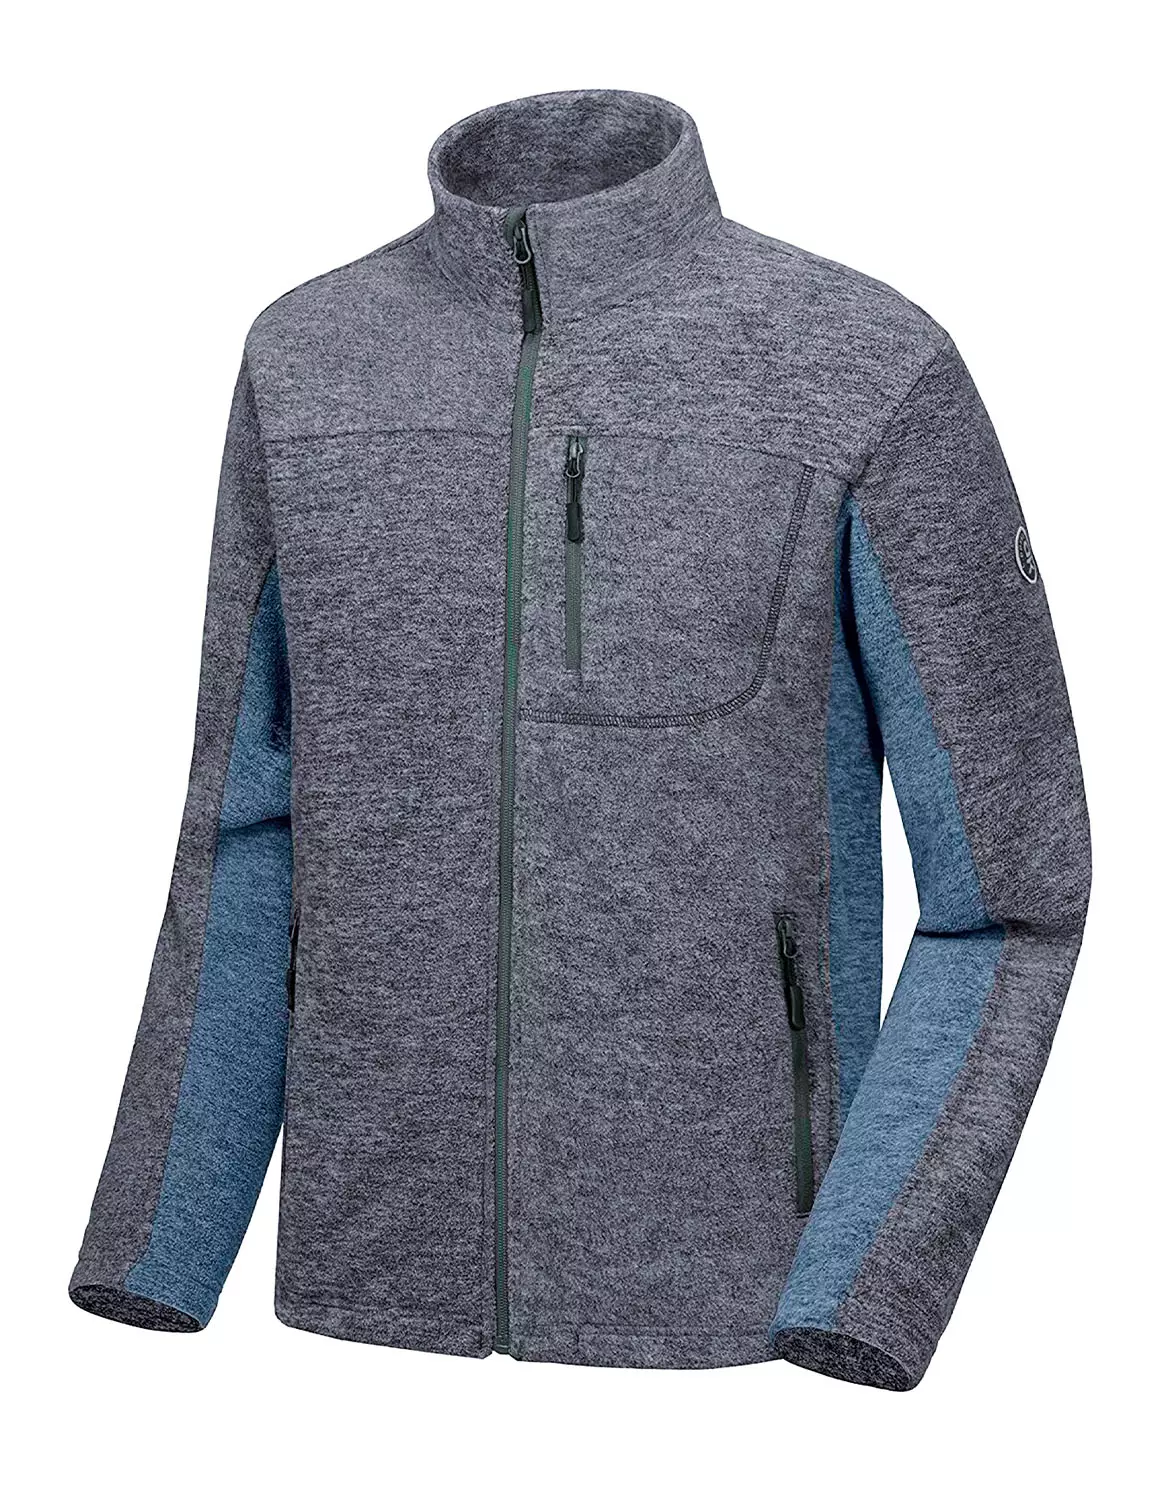 One of the best winter golf jacket for cold weather